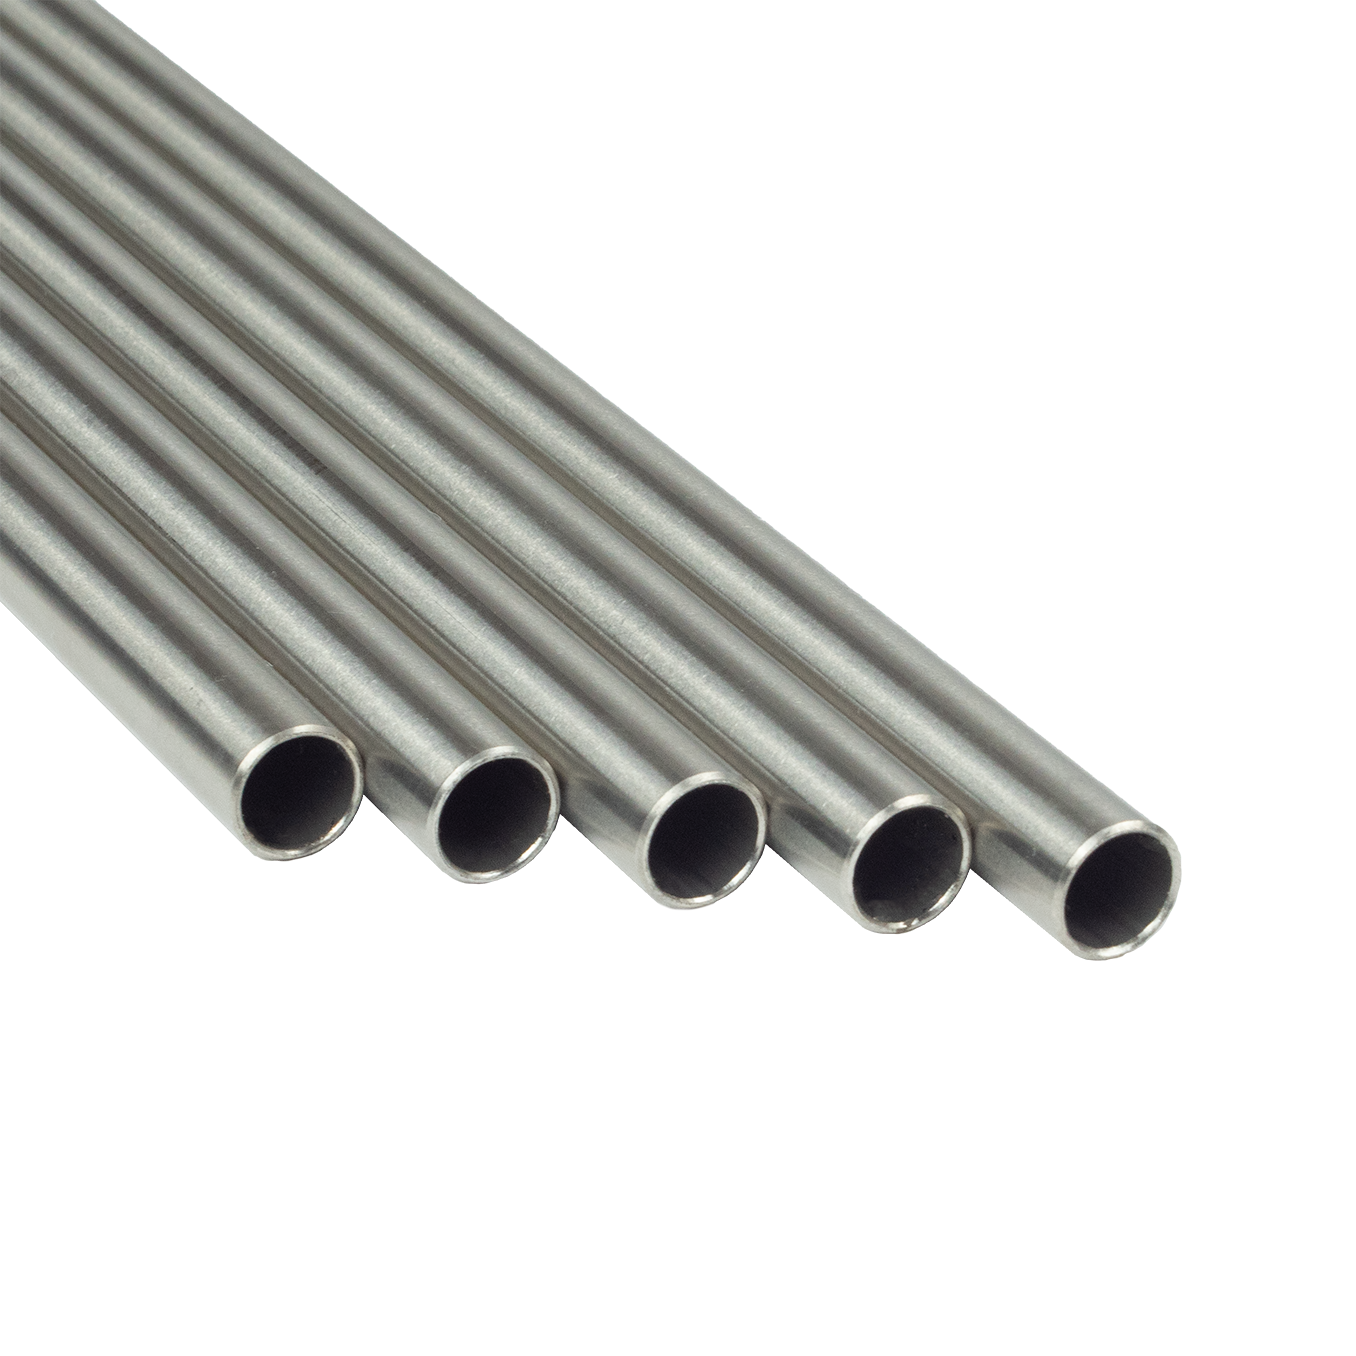 SFS Stand Tube - Ø 10 x 1 mm, length 1000 mm - stainless steel